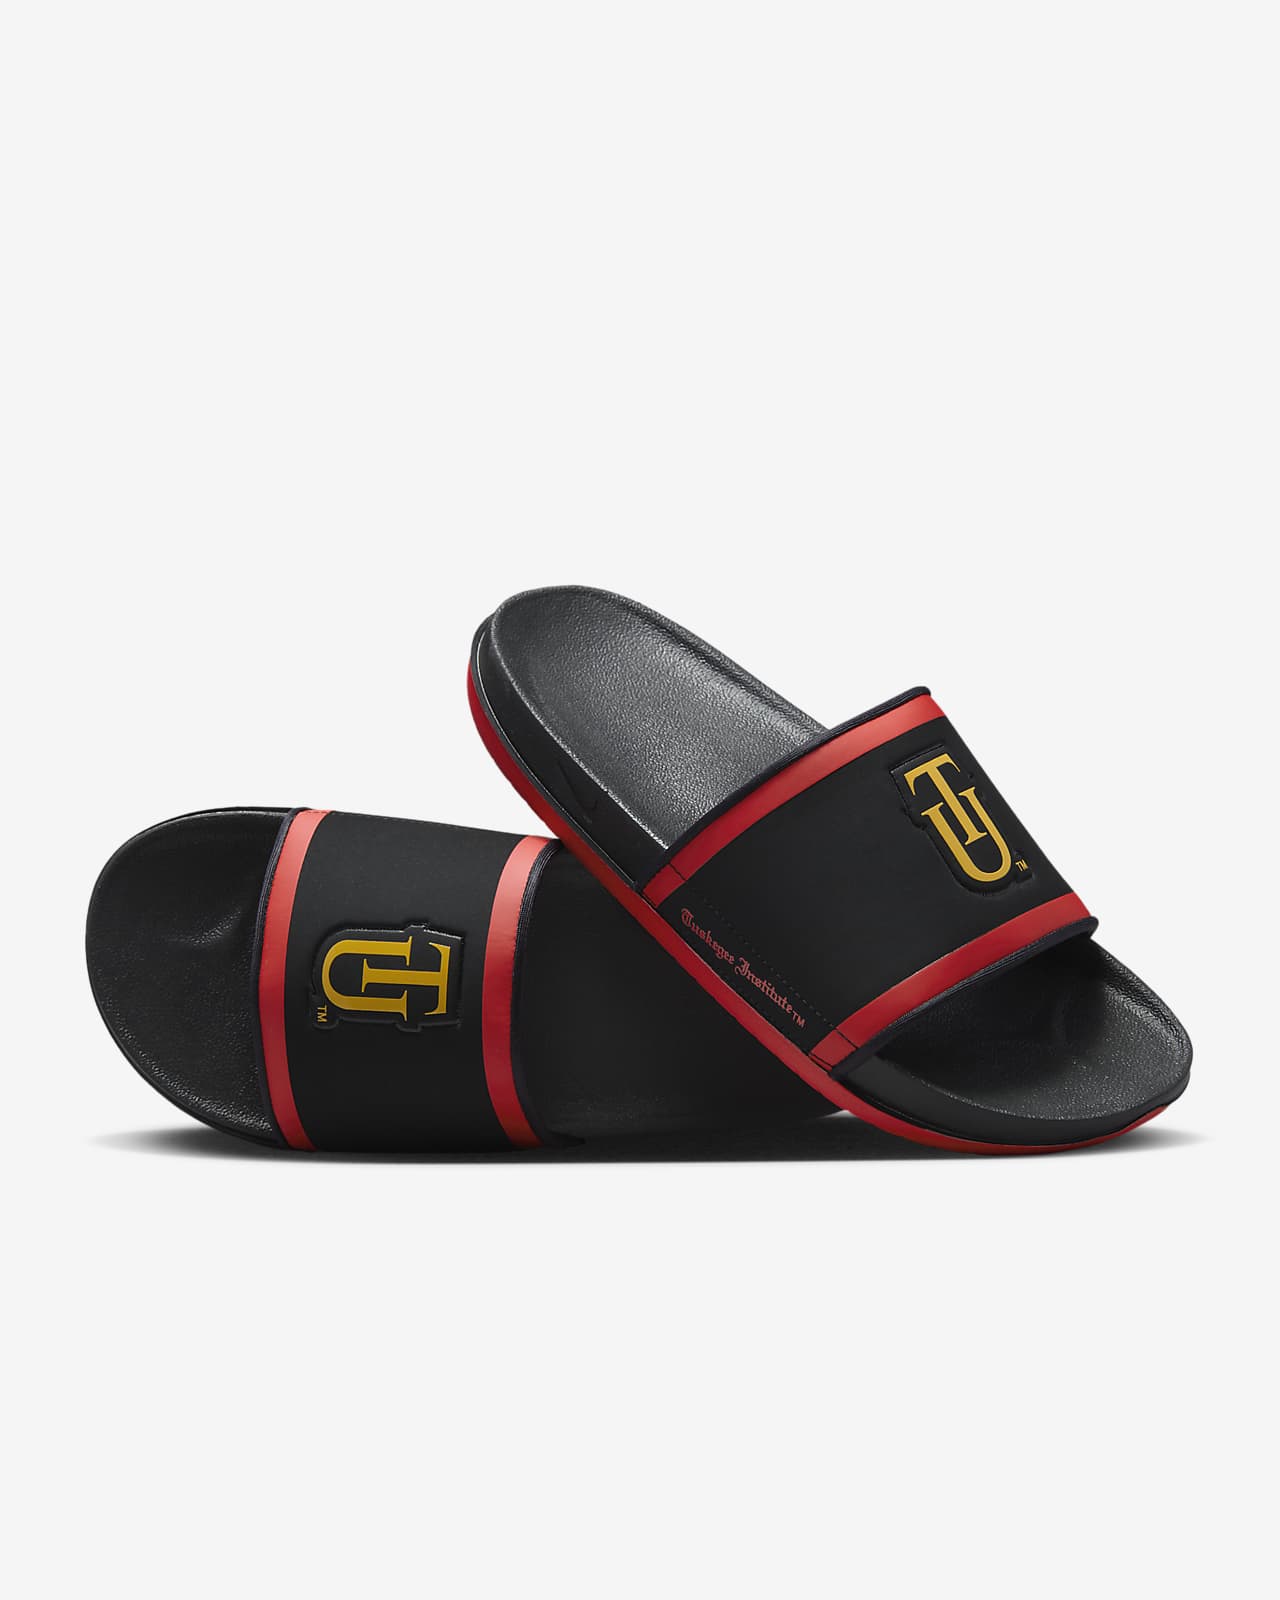 Tuskegee Nike College Offcourt Slides